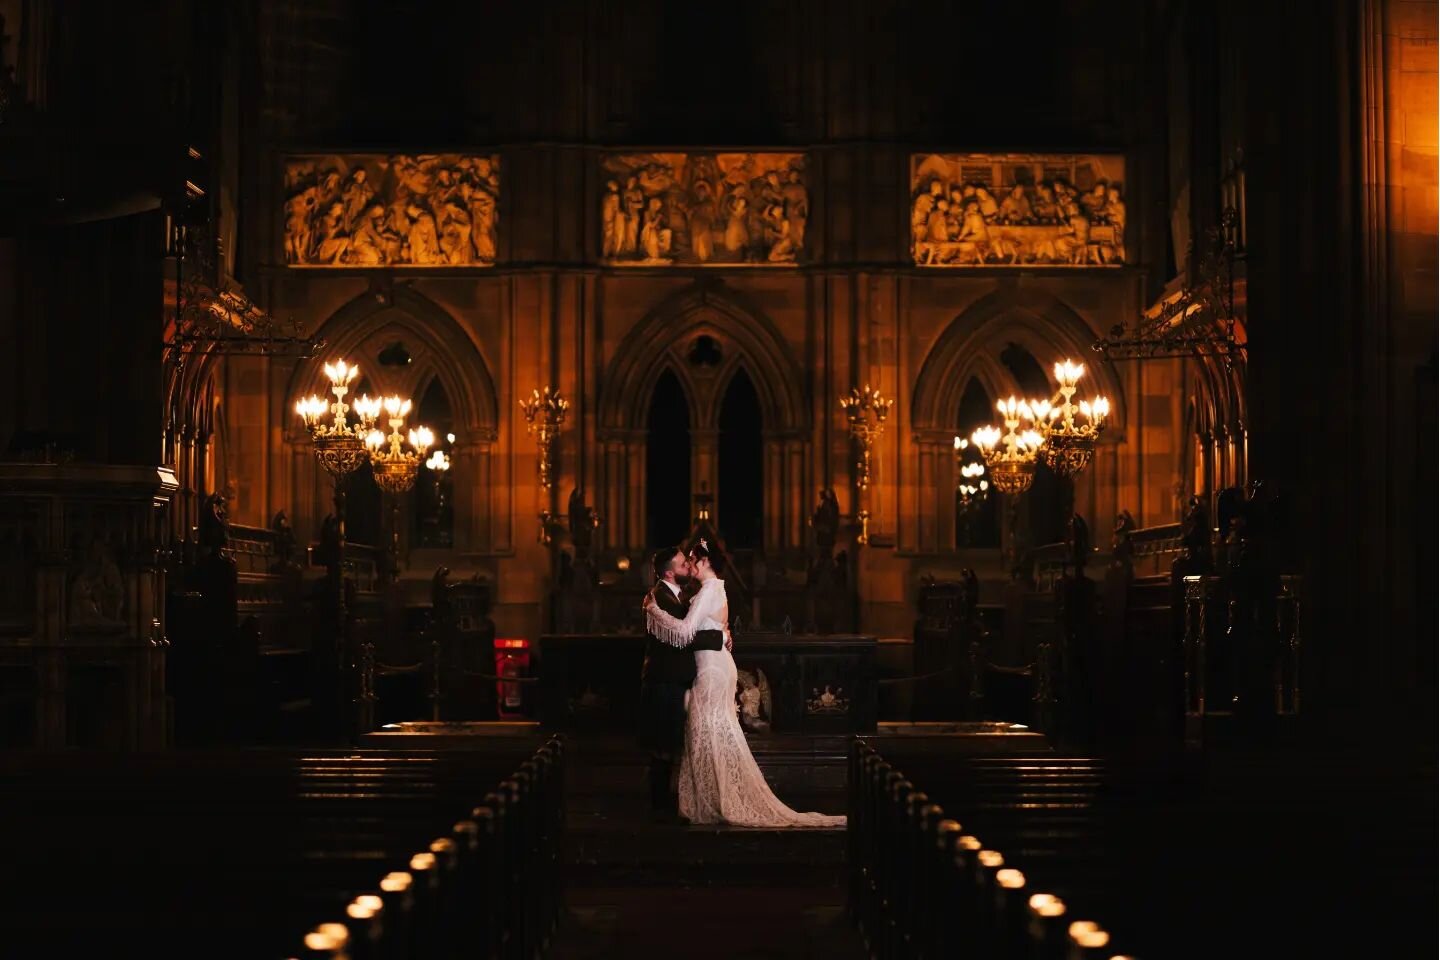 What an amazing couple. What an amazing vision. The Coats church in Paisley was just magnificent. Equal parts elegance and fun, a day packed with happiness and beauty. 

Venue- @coats_paisley Paisley
Dresser - @dont_stress_the_dress_ltd
Celebrant- Li